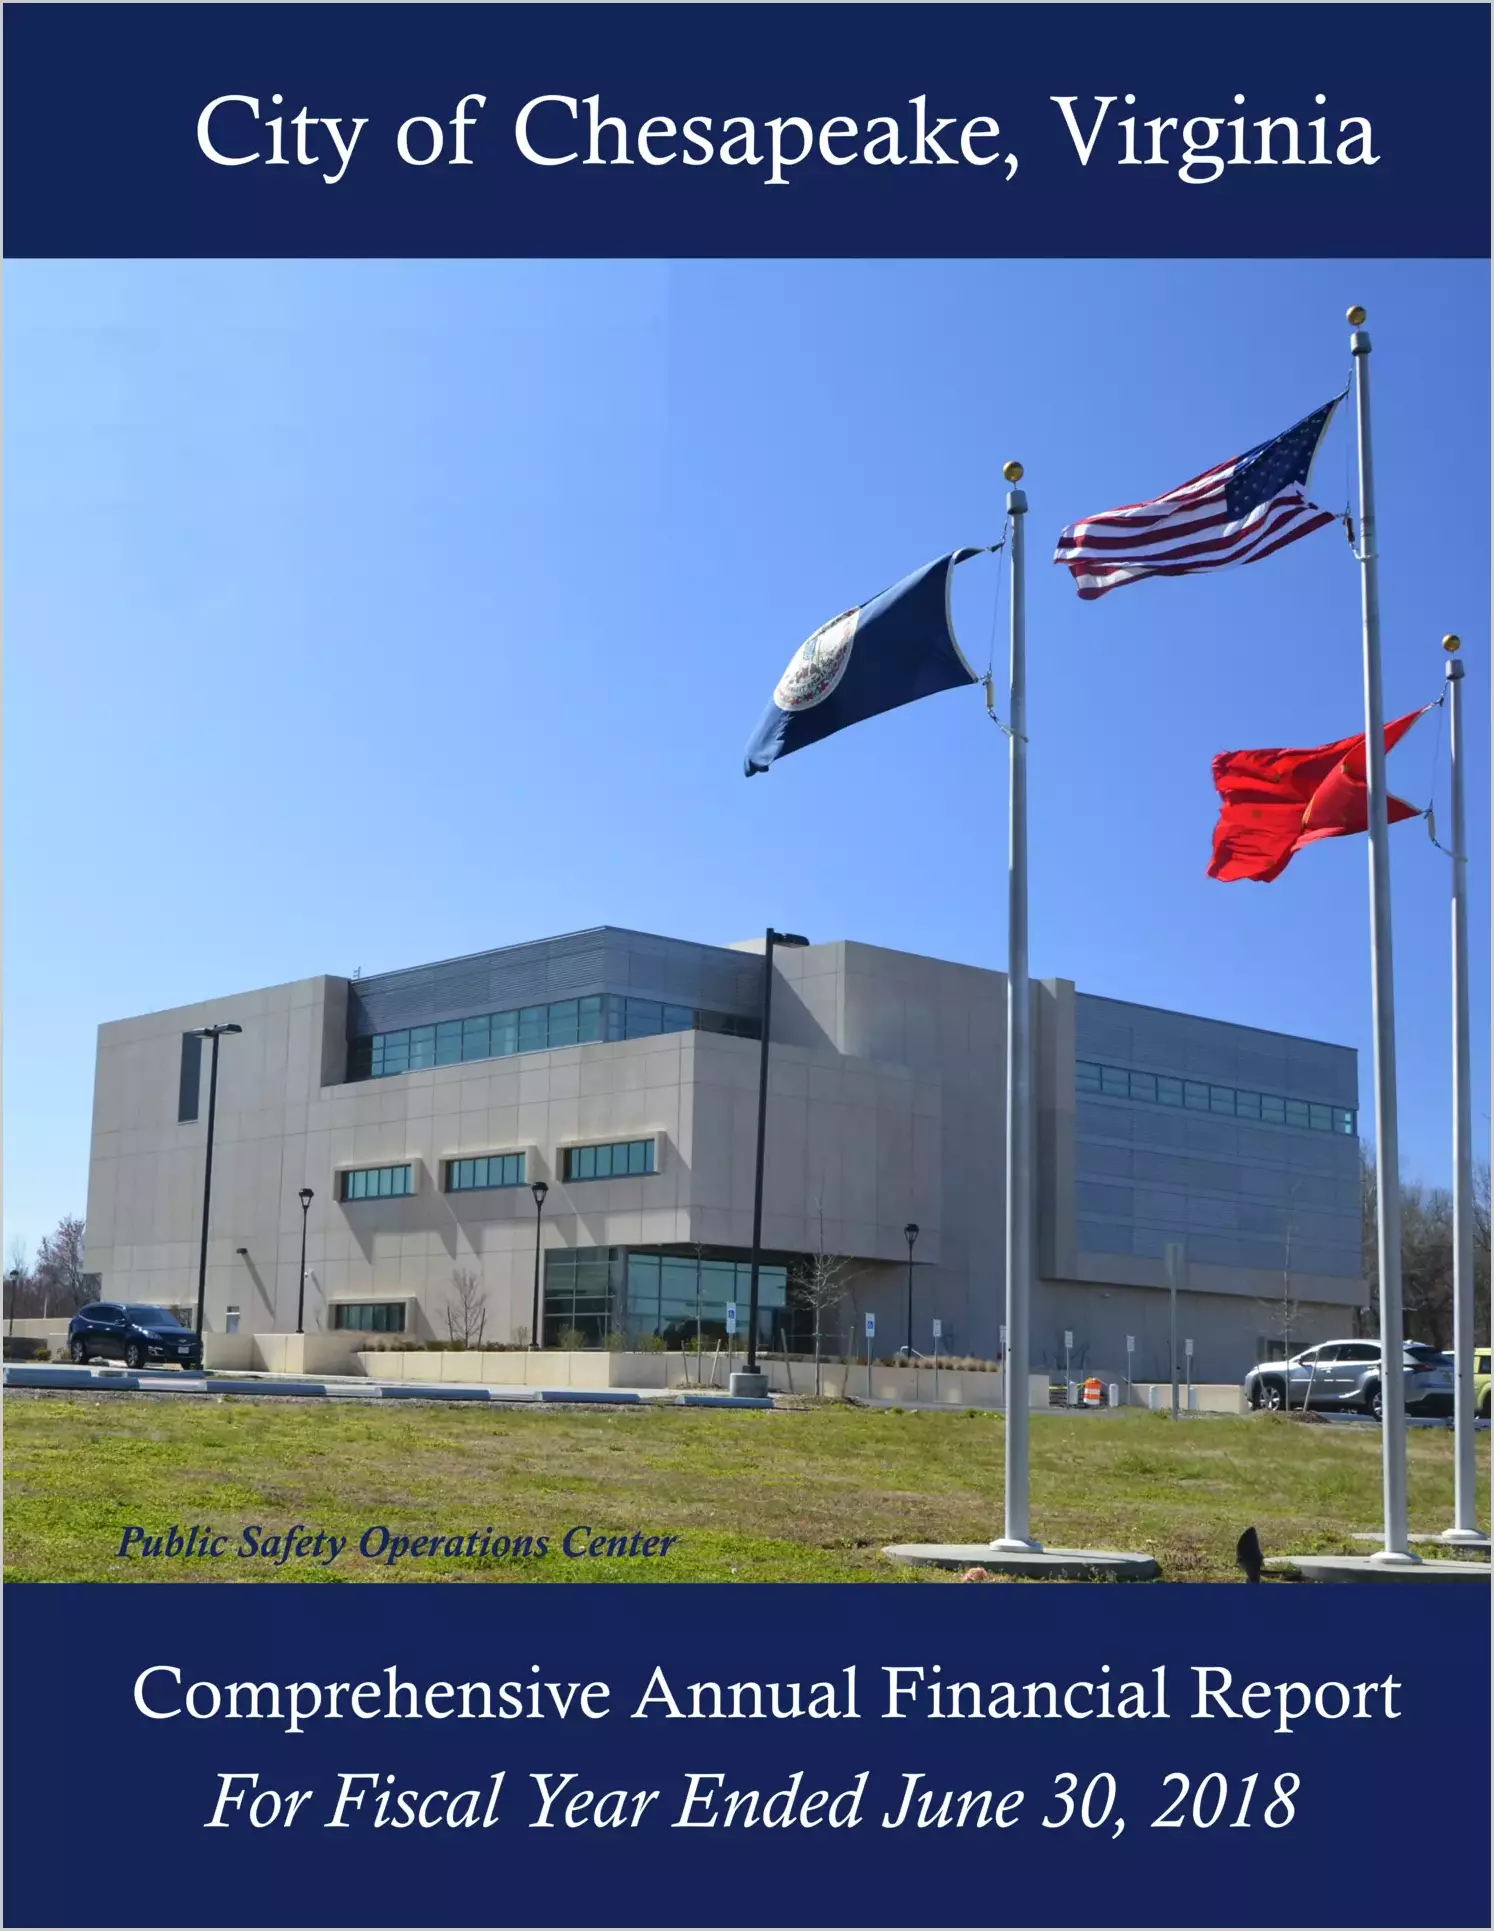 2018 Annual Financial Report for City of Chesapeake